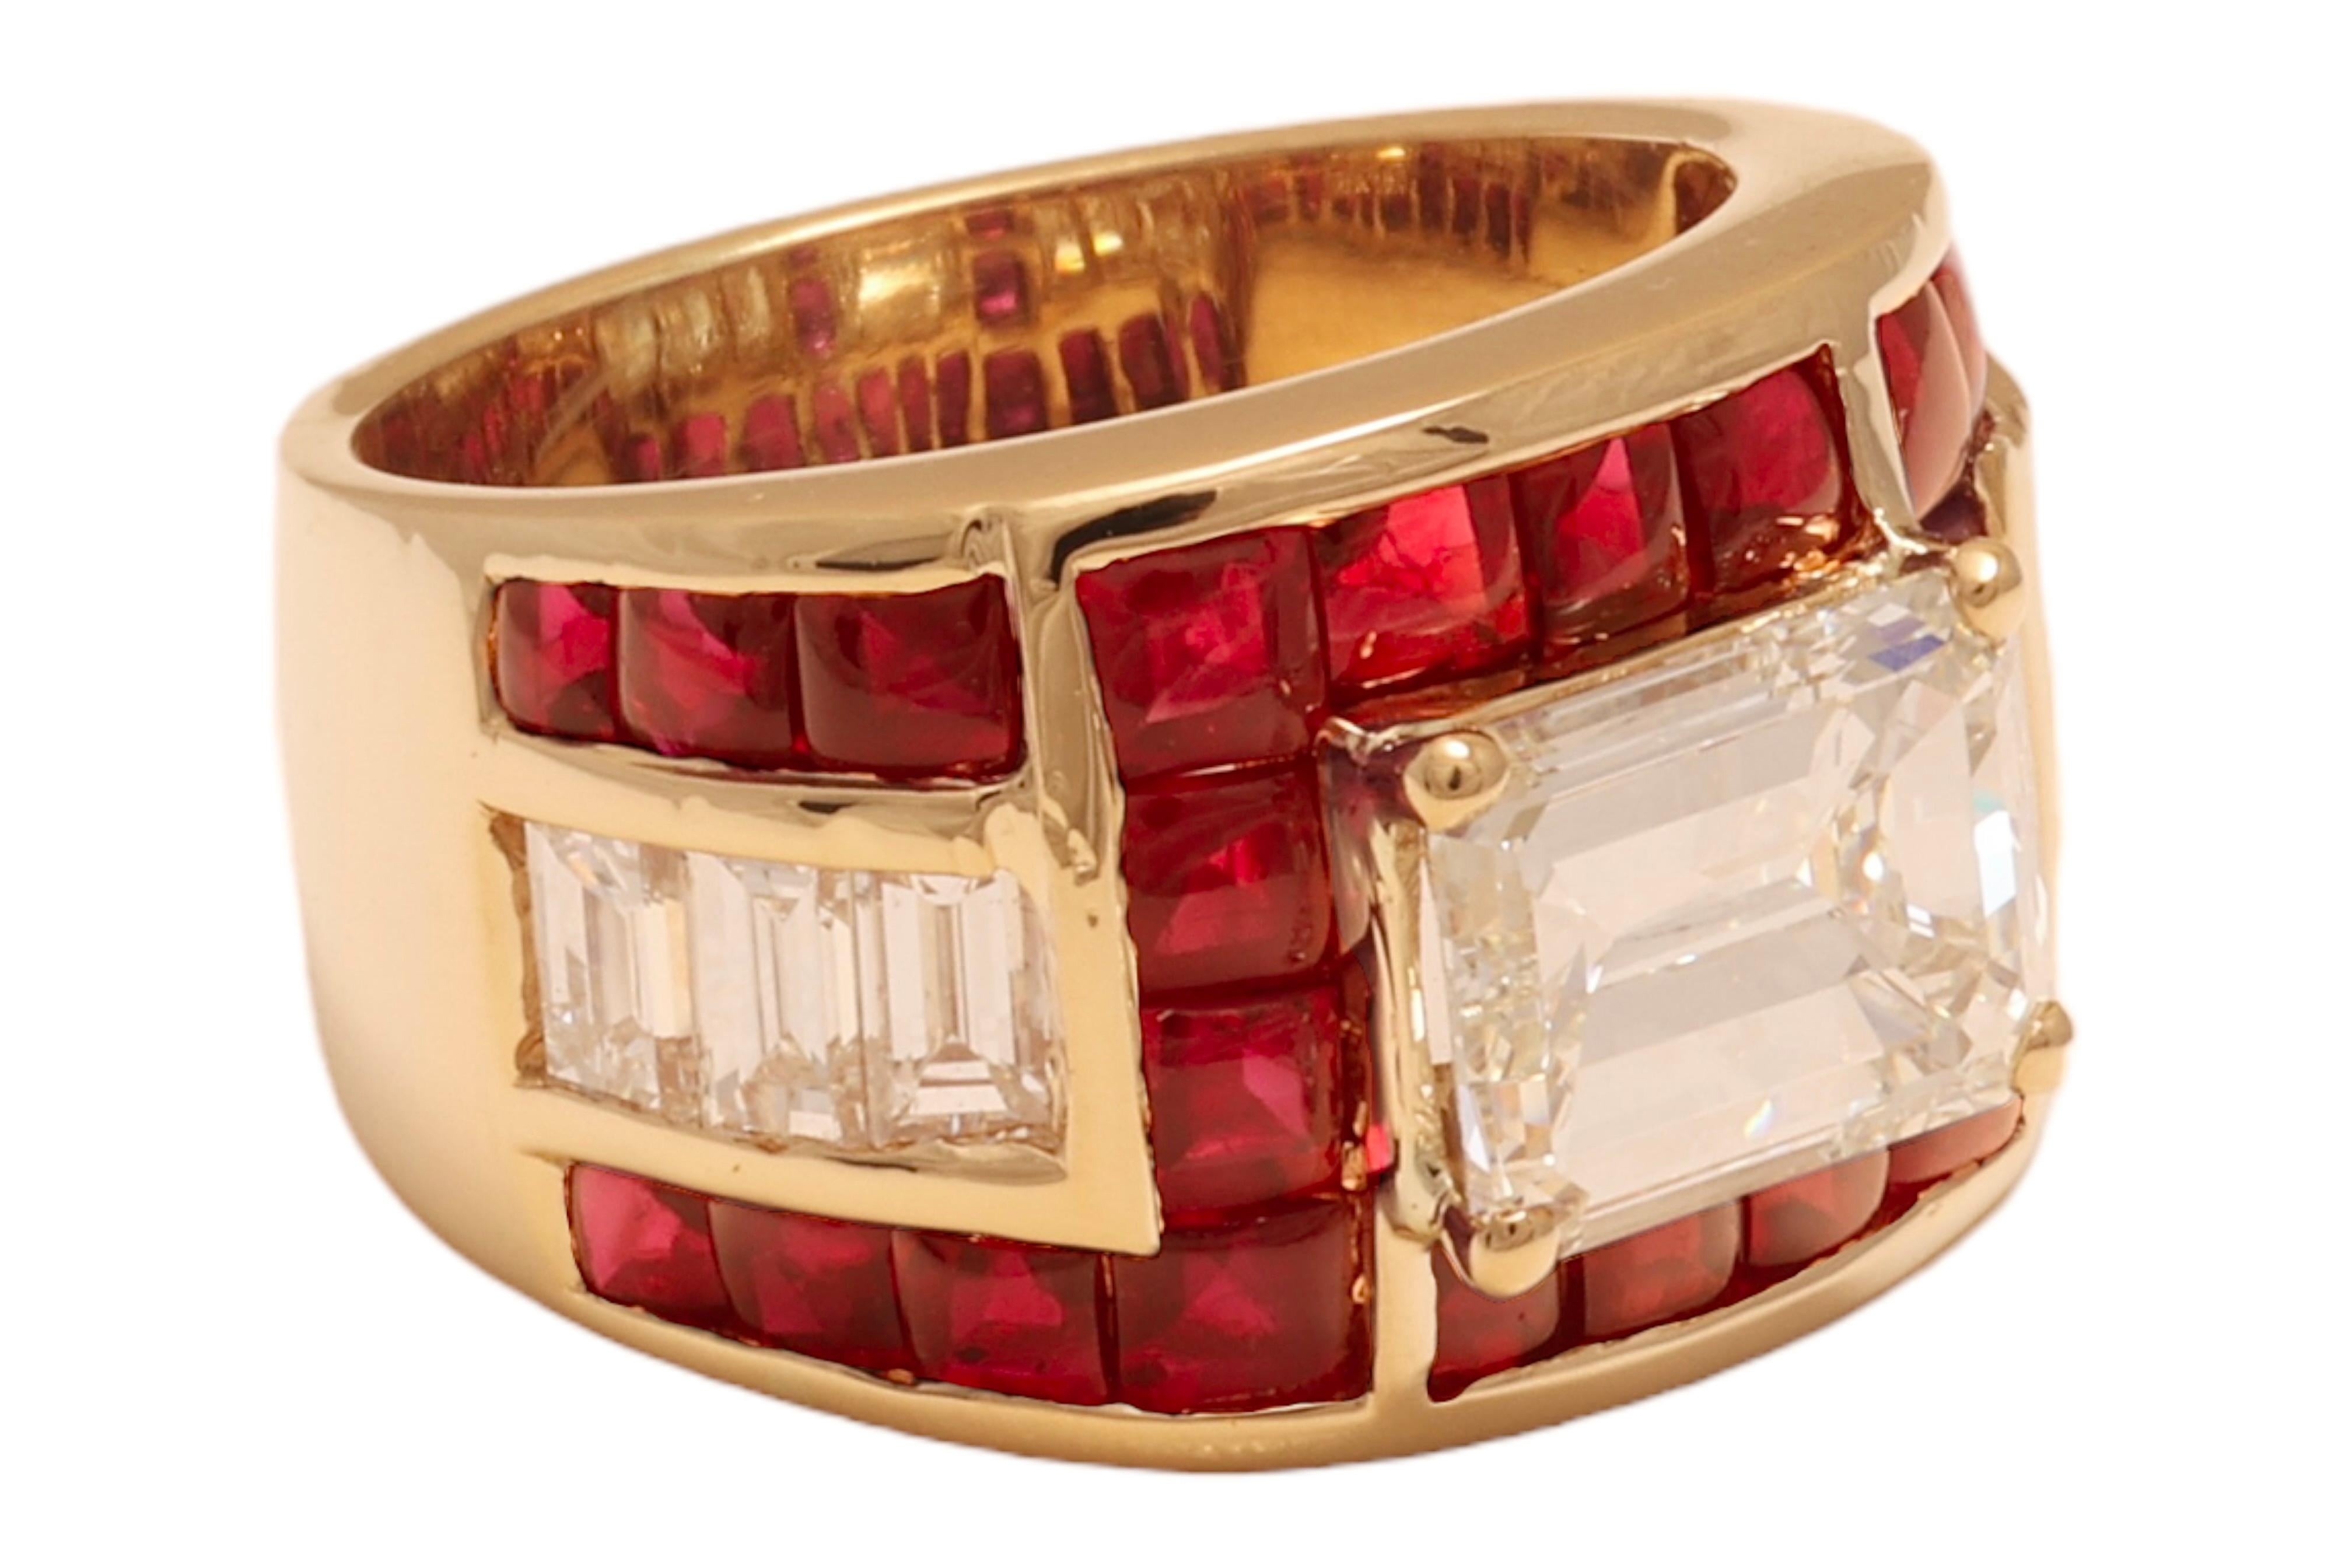 18 Kt. Gold Adler Genèva Emerald Cut Diamond & Ruby Ring, Estate Sultan Oman In Excellent Condition For Sale In Antwerp, BE